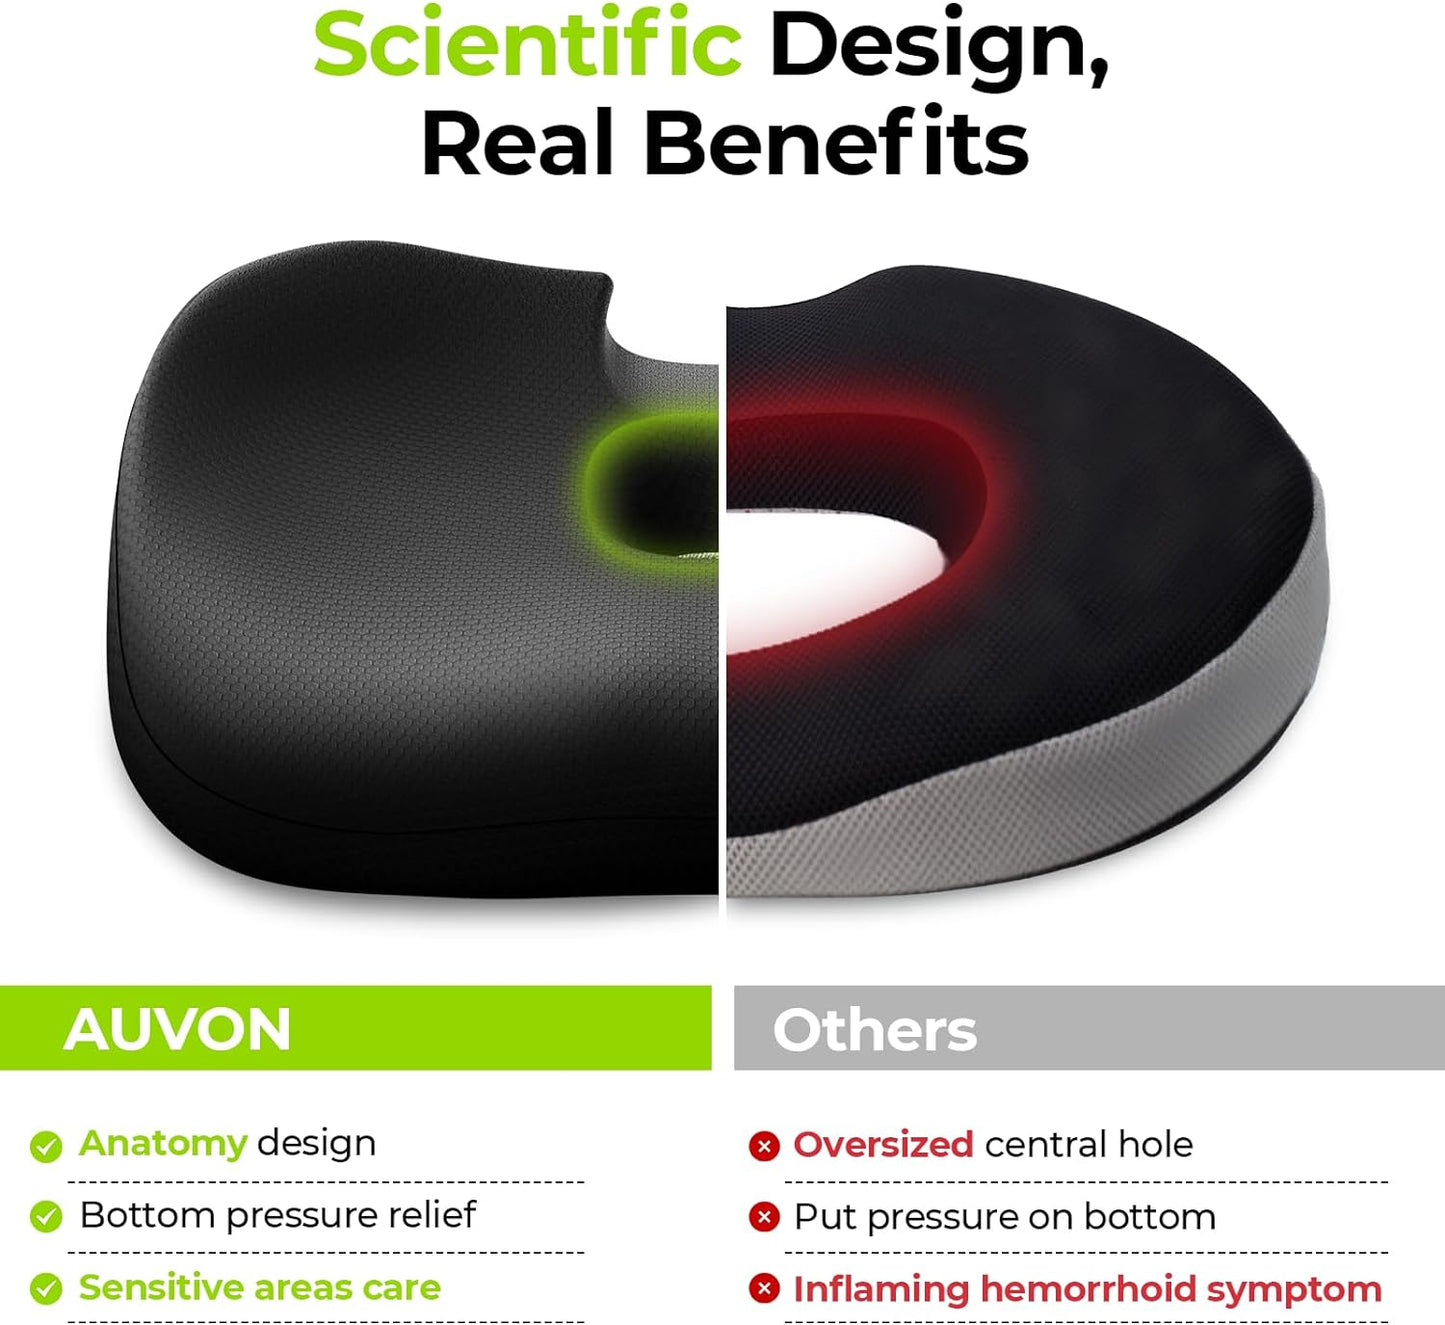 AUVON Innovation Donut Pillow Hemorrhoids Scientific Center Hole & U-Shaped Cutout, Orthopedic Pain Relief Tailbone, Coccyx, Prostate, Postpartum Pregnancy & After Surgery Sitting Relief Black